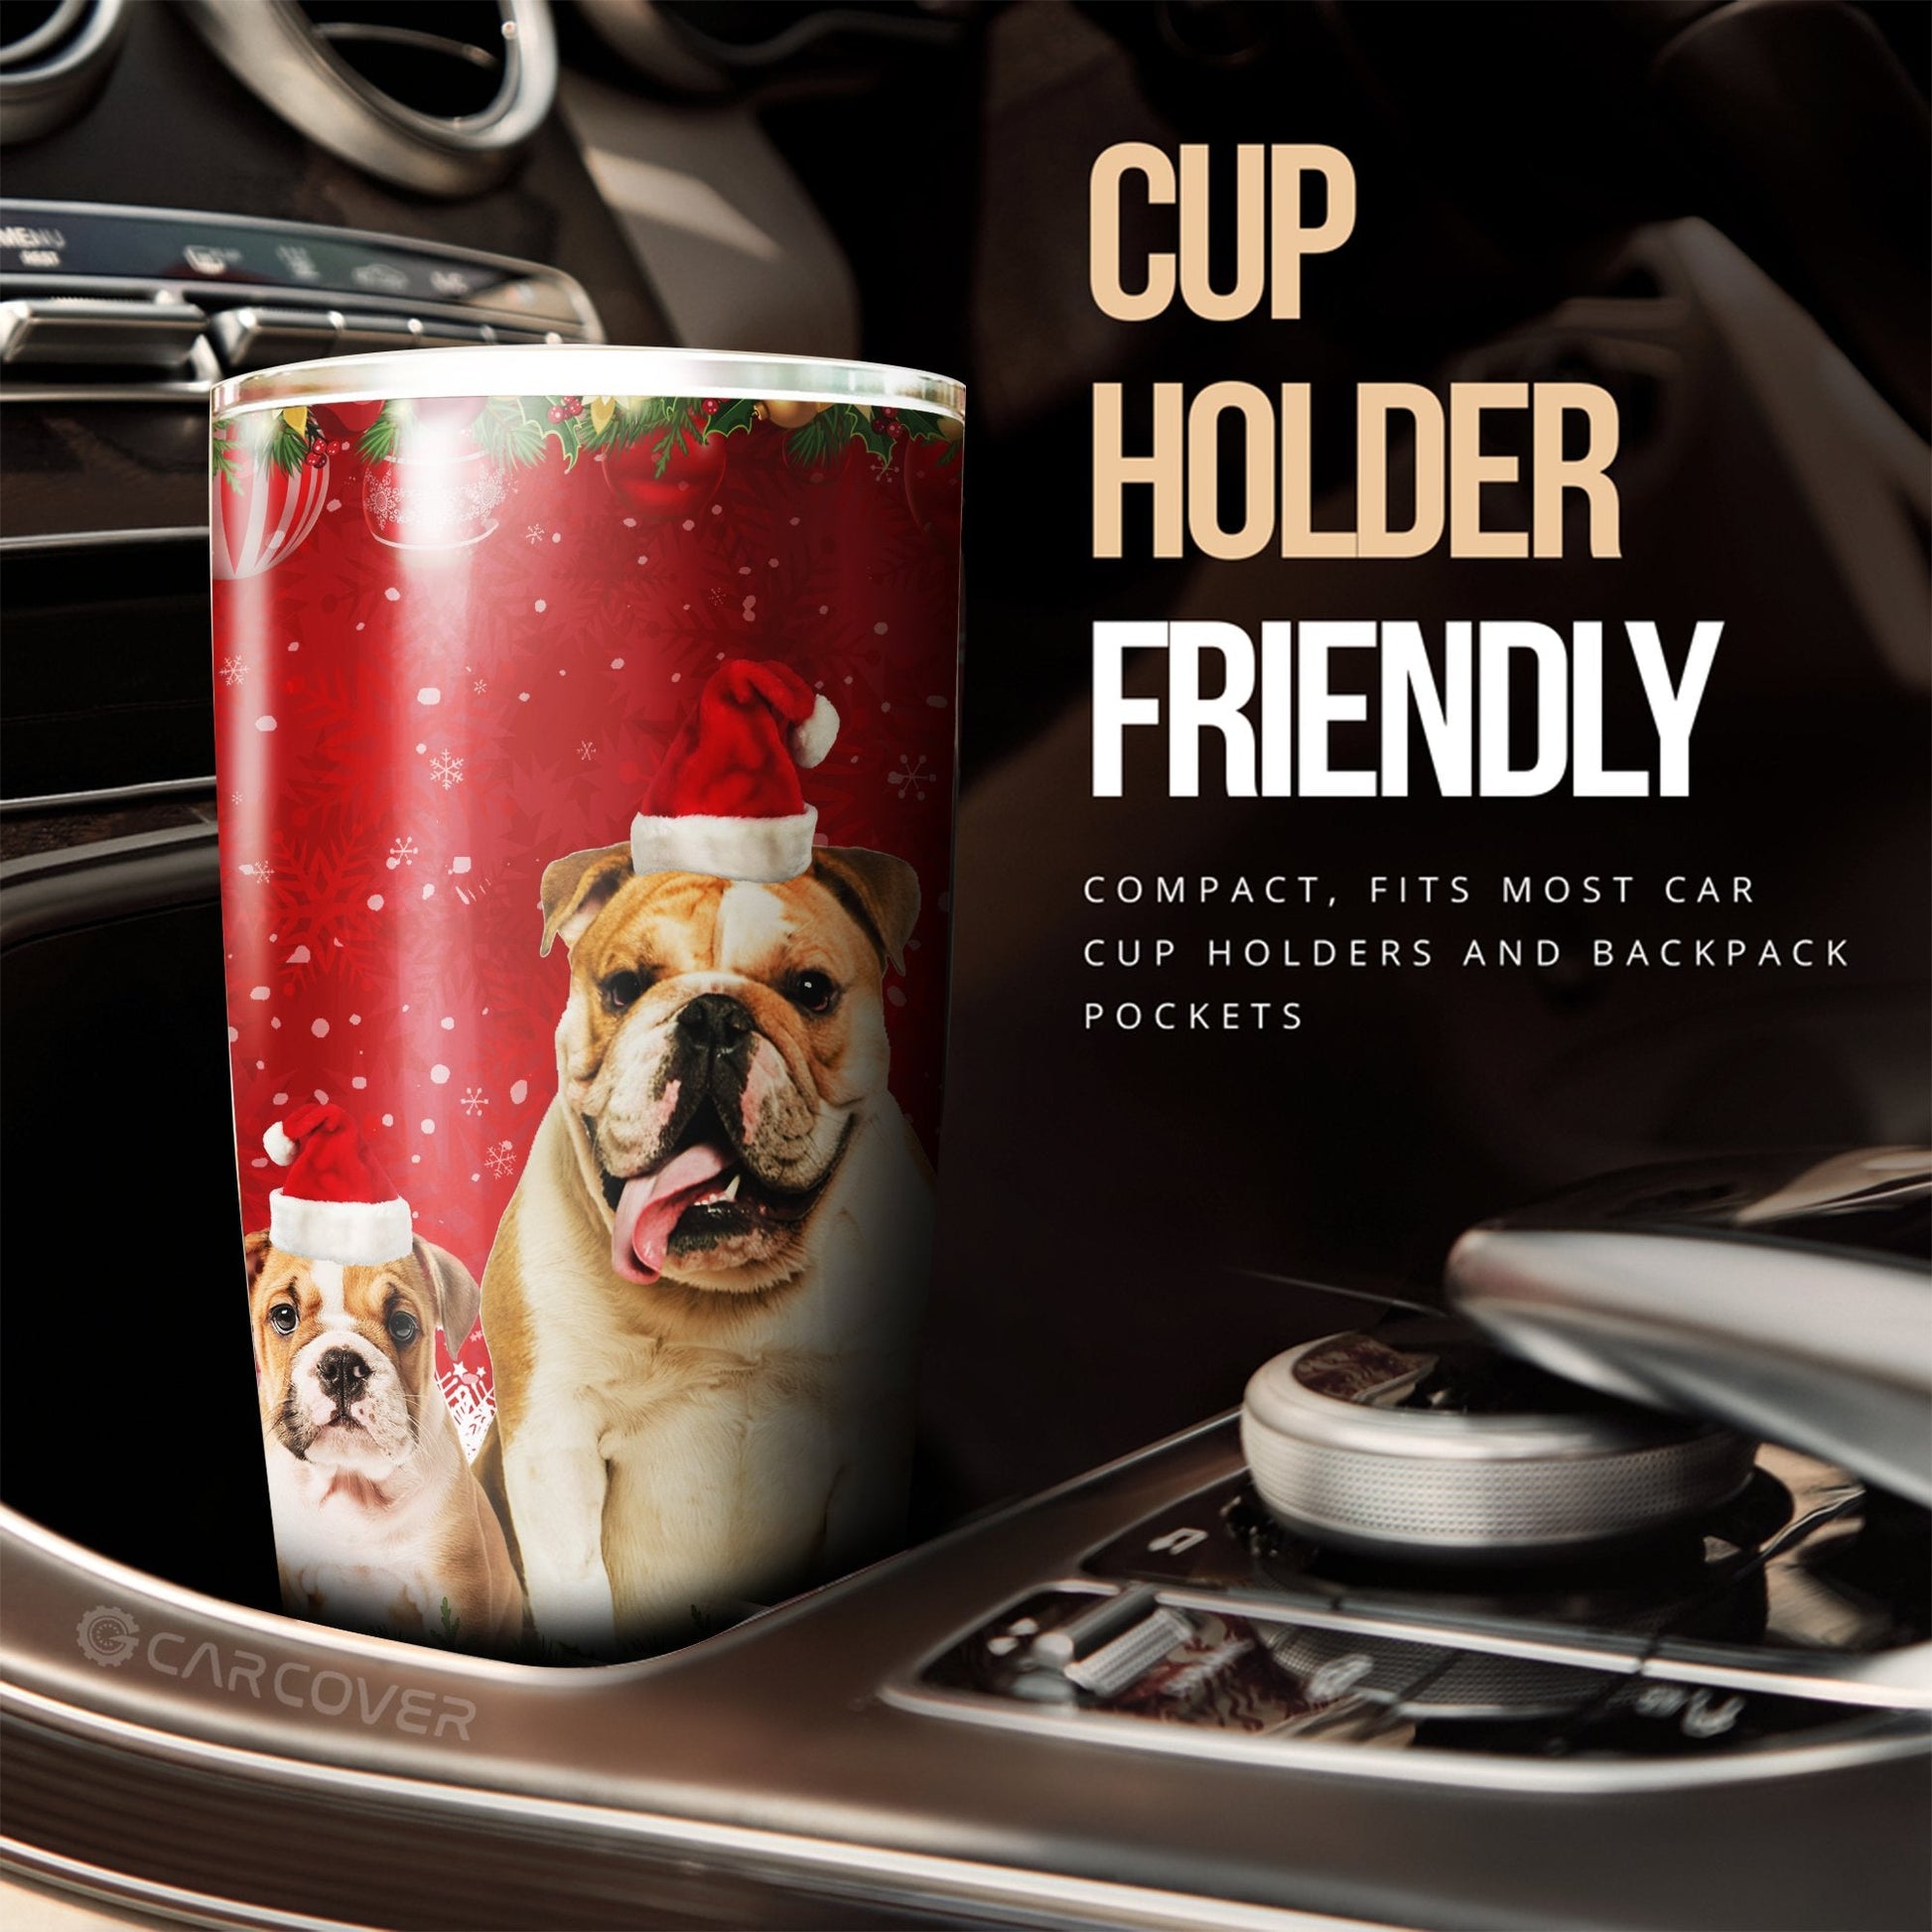 Christmas Bulldogs Tumbler Cup Custom Car Interior Accessories For Dog Lovers - Gearcarcover - 3